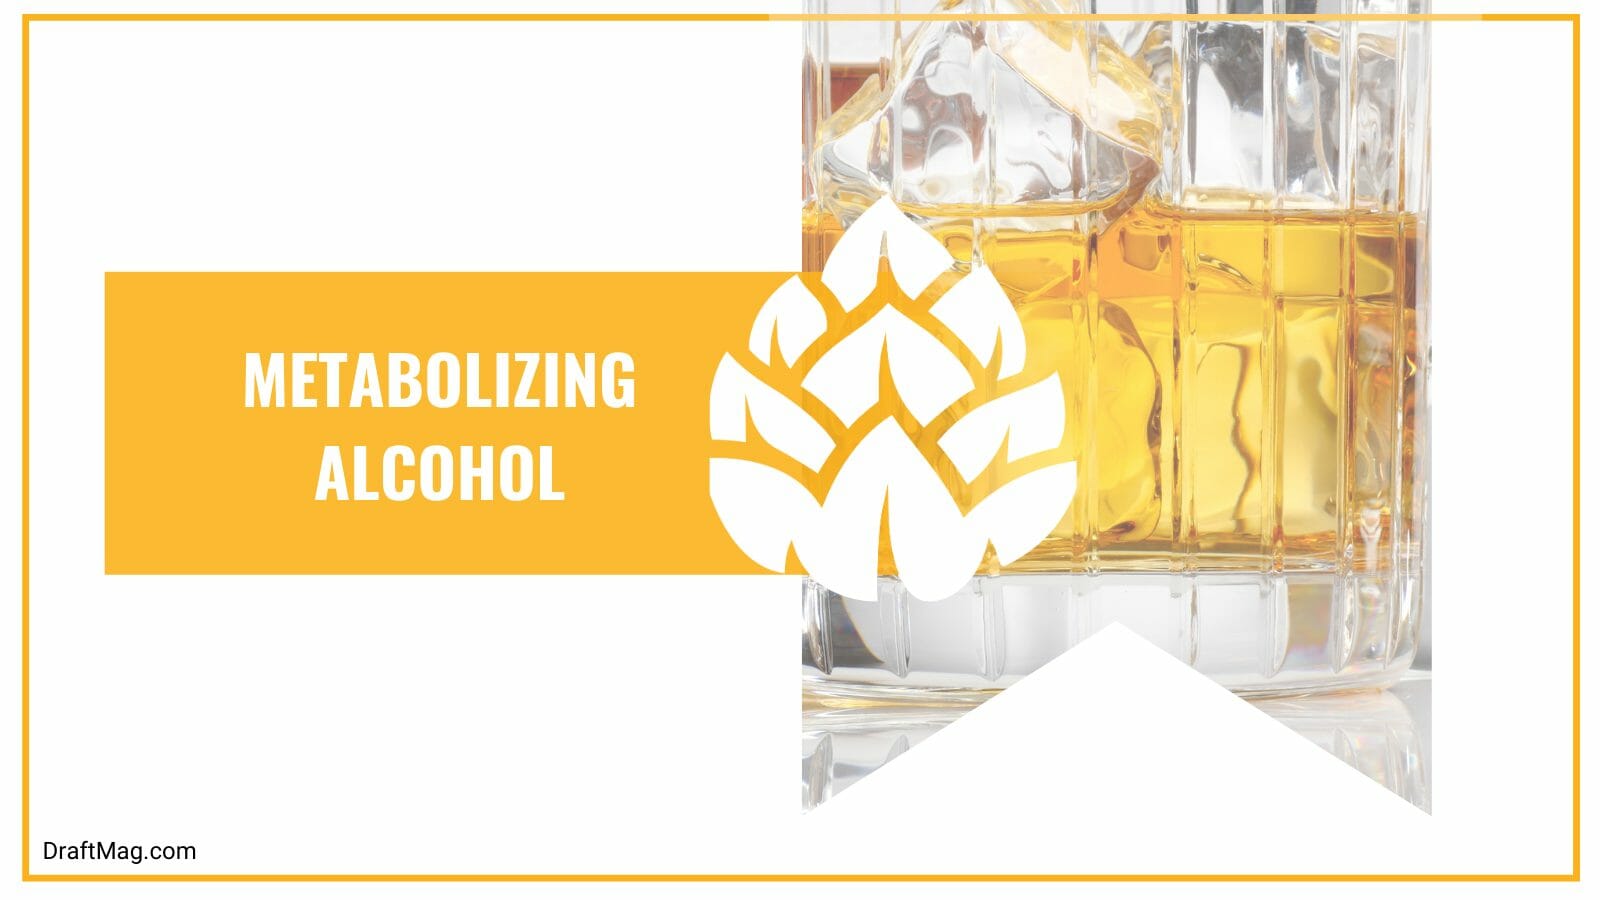 Metabolizing Alcohol of Beer